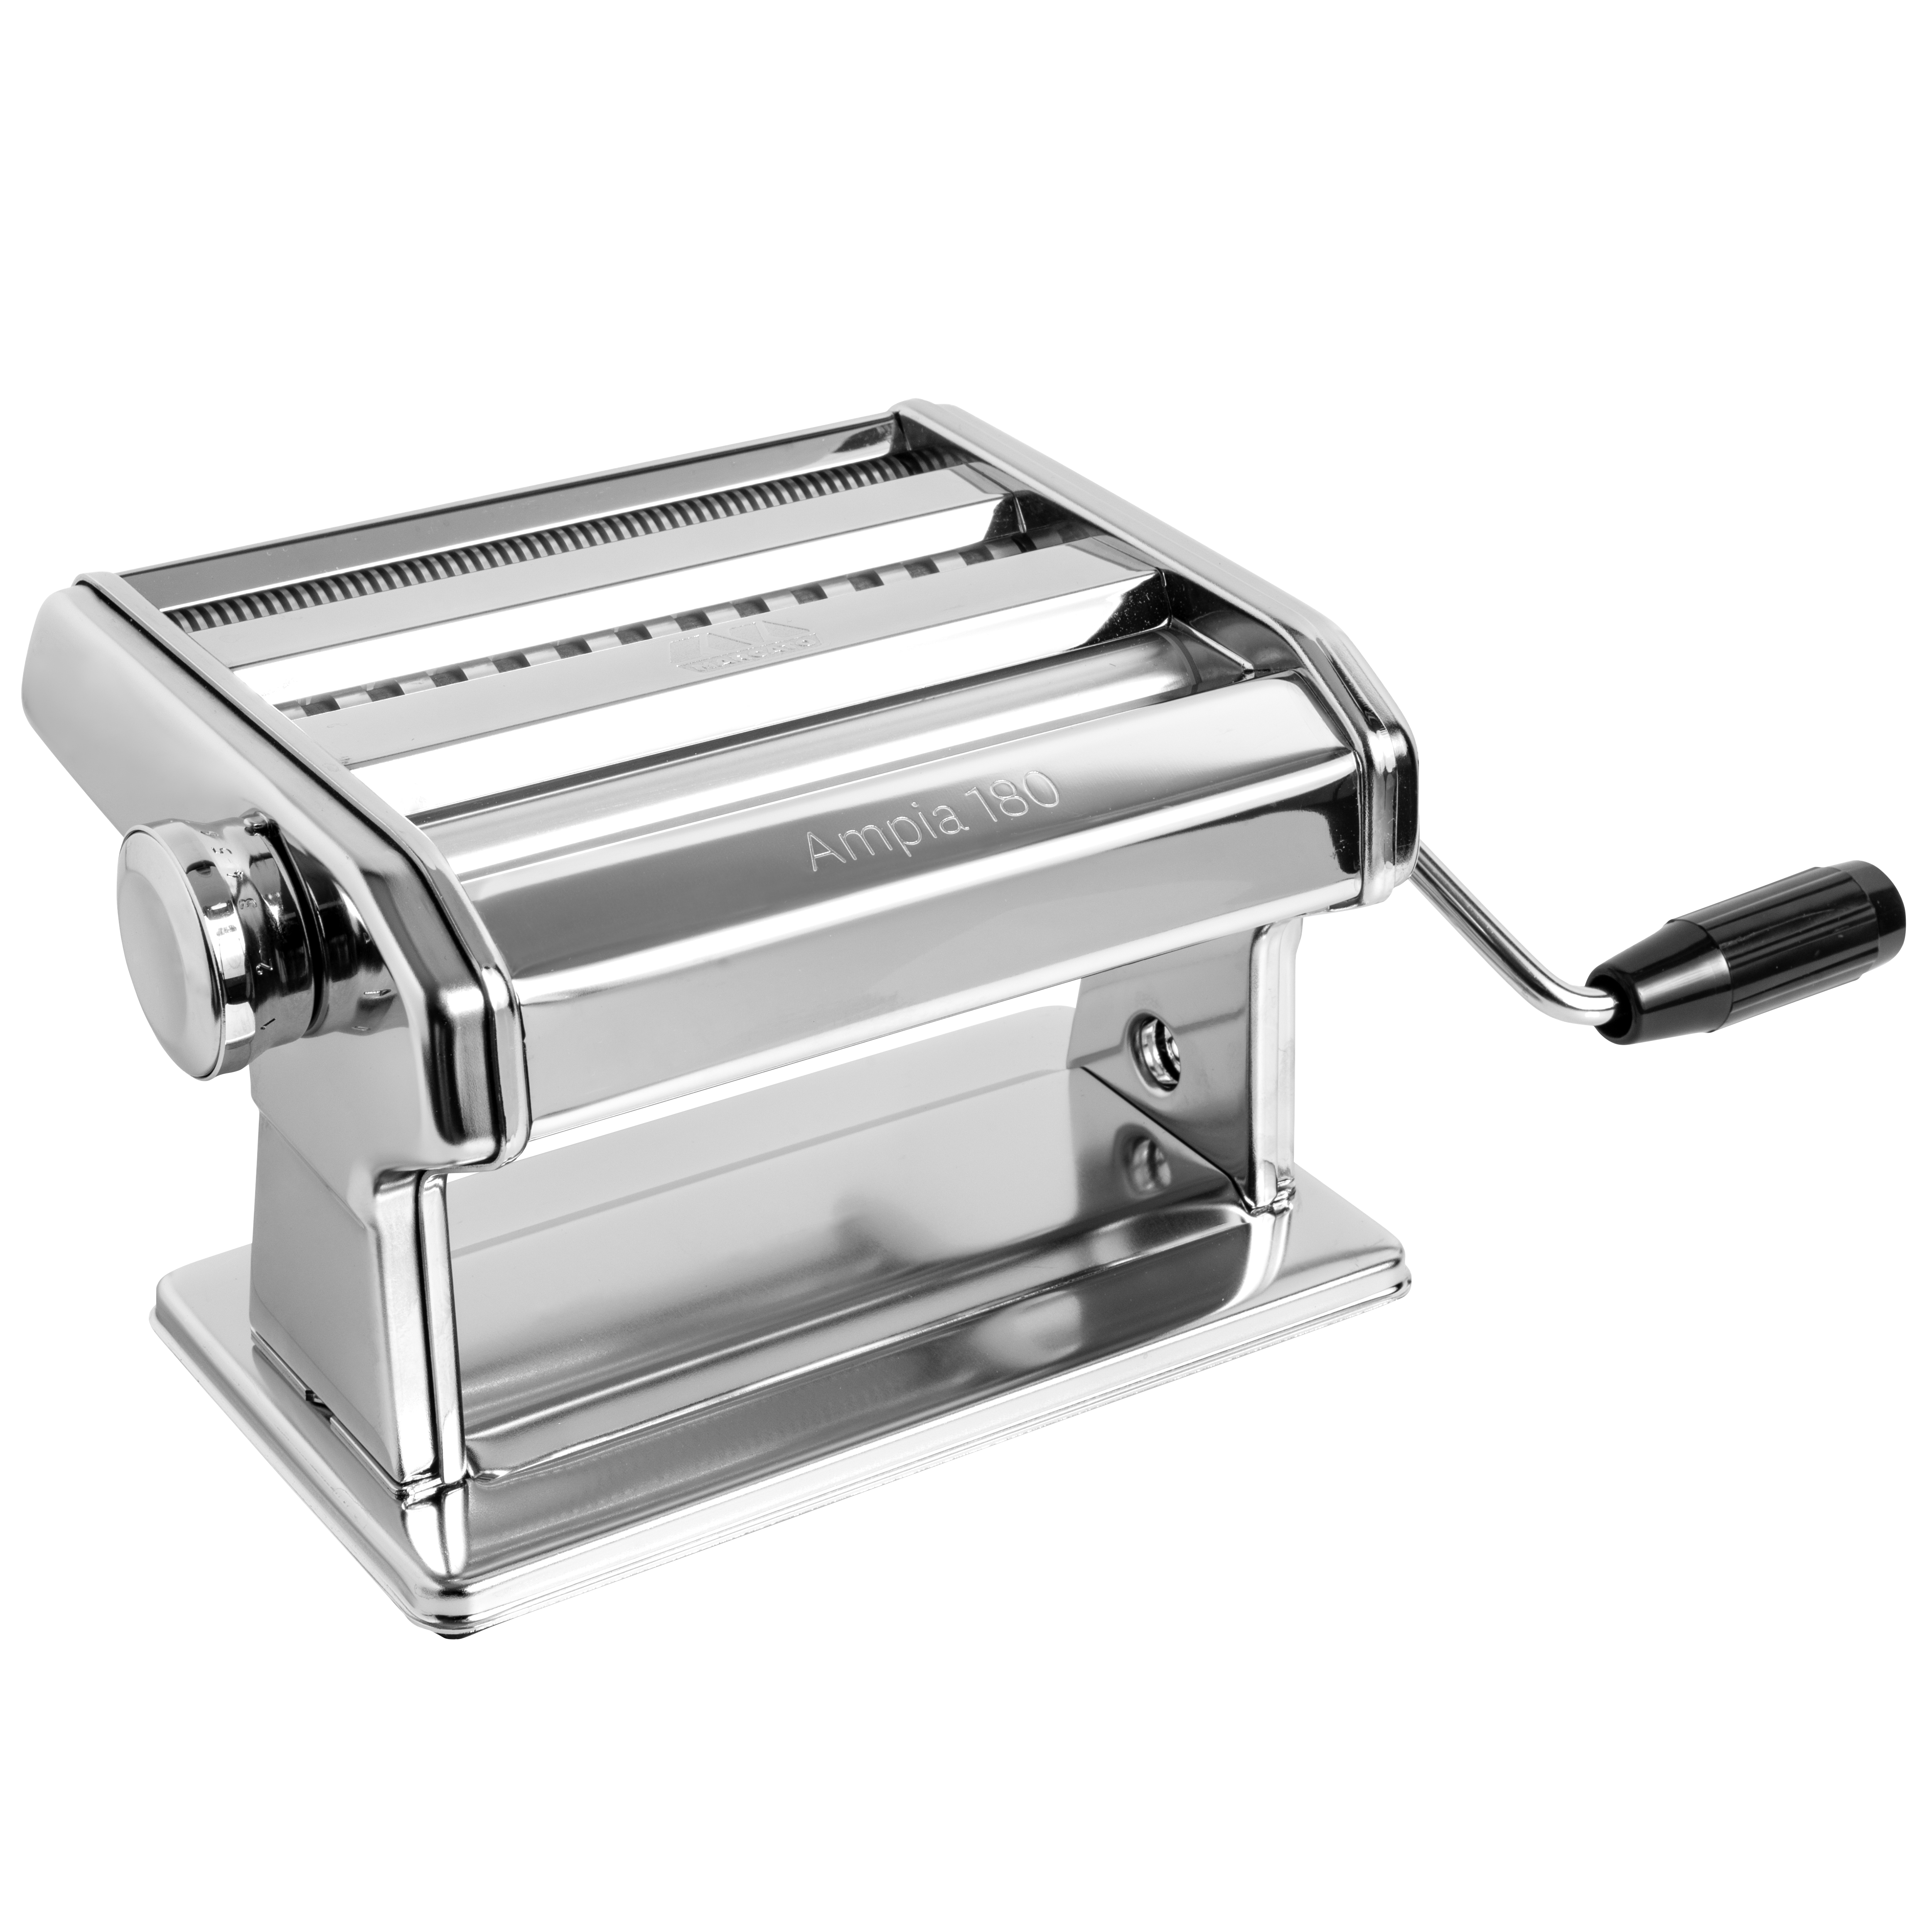  Marcato Atlas Pasta Machine, Made in Italy, Black, Includes  Pasta Cutter, Hand Crank, and Instructions : Home & Kitchen